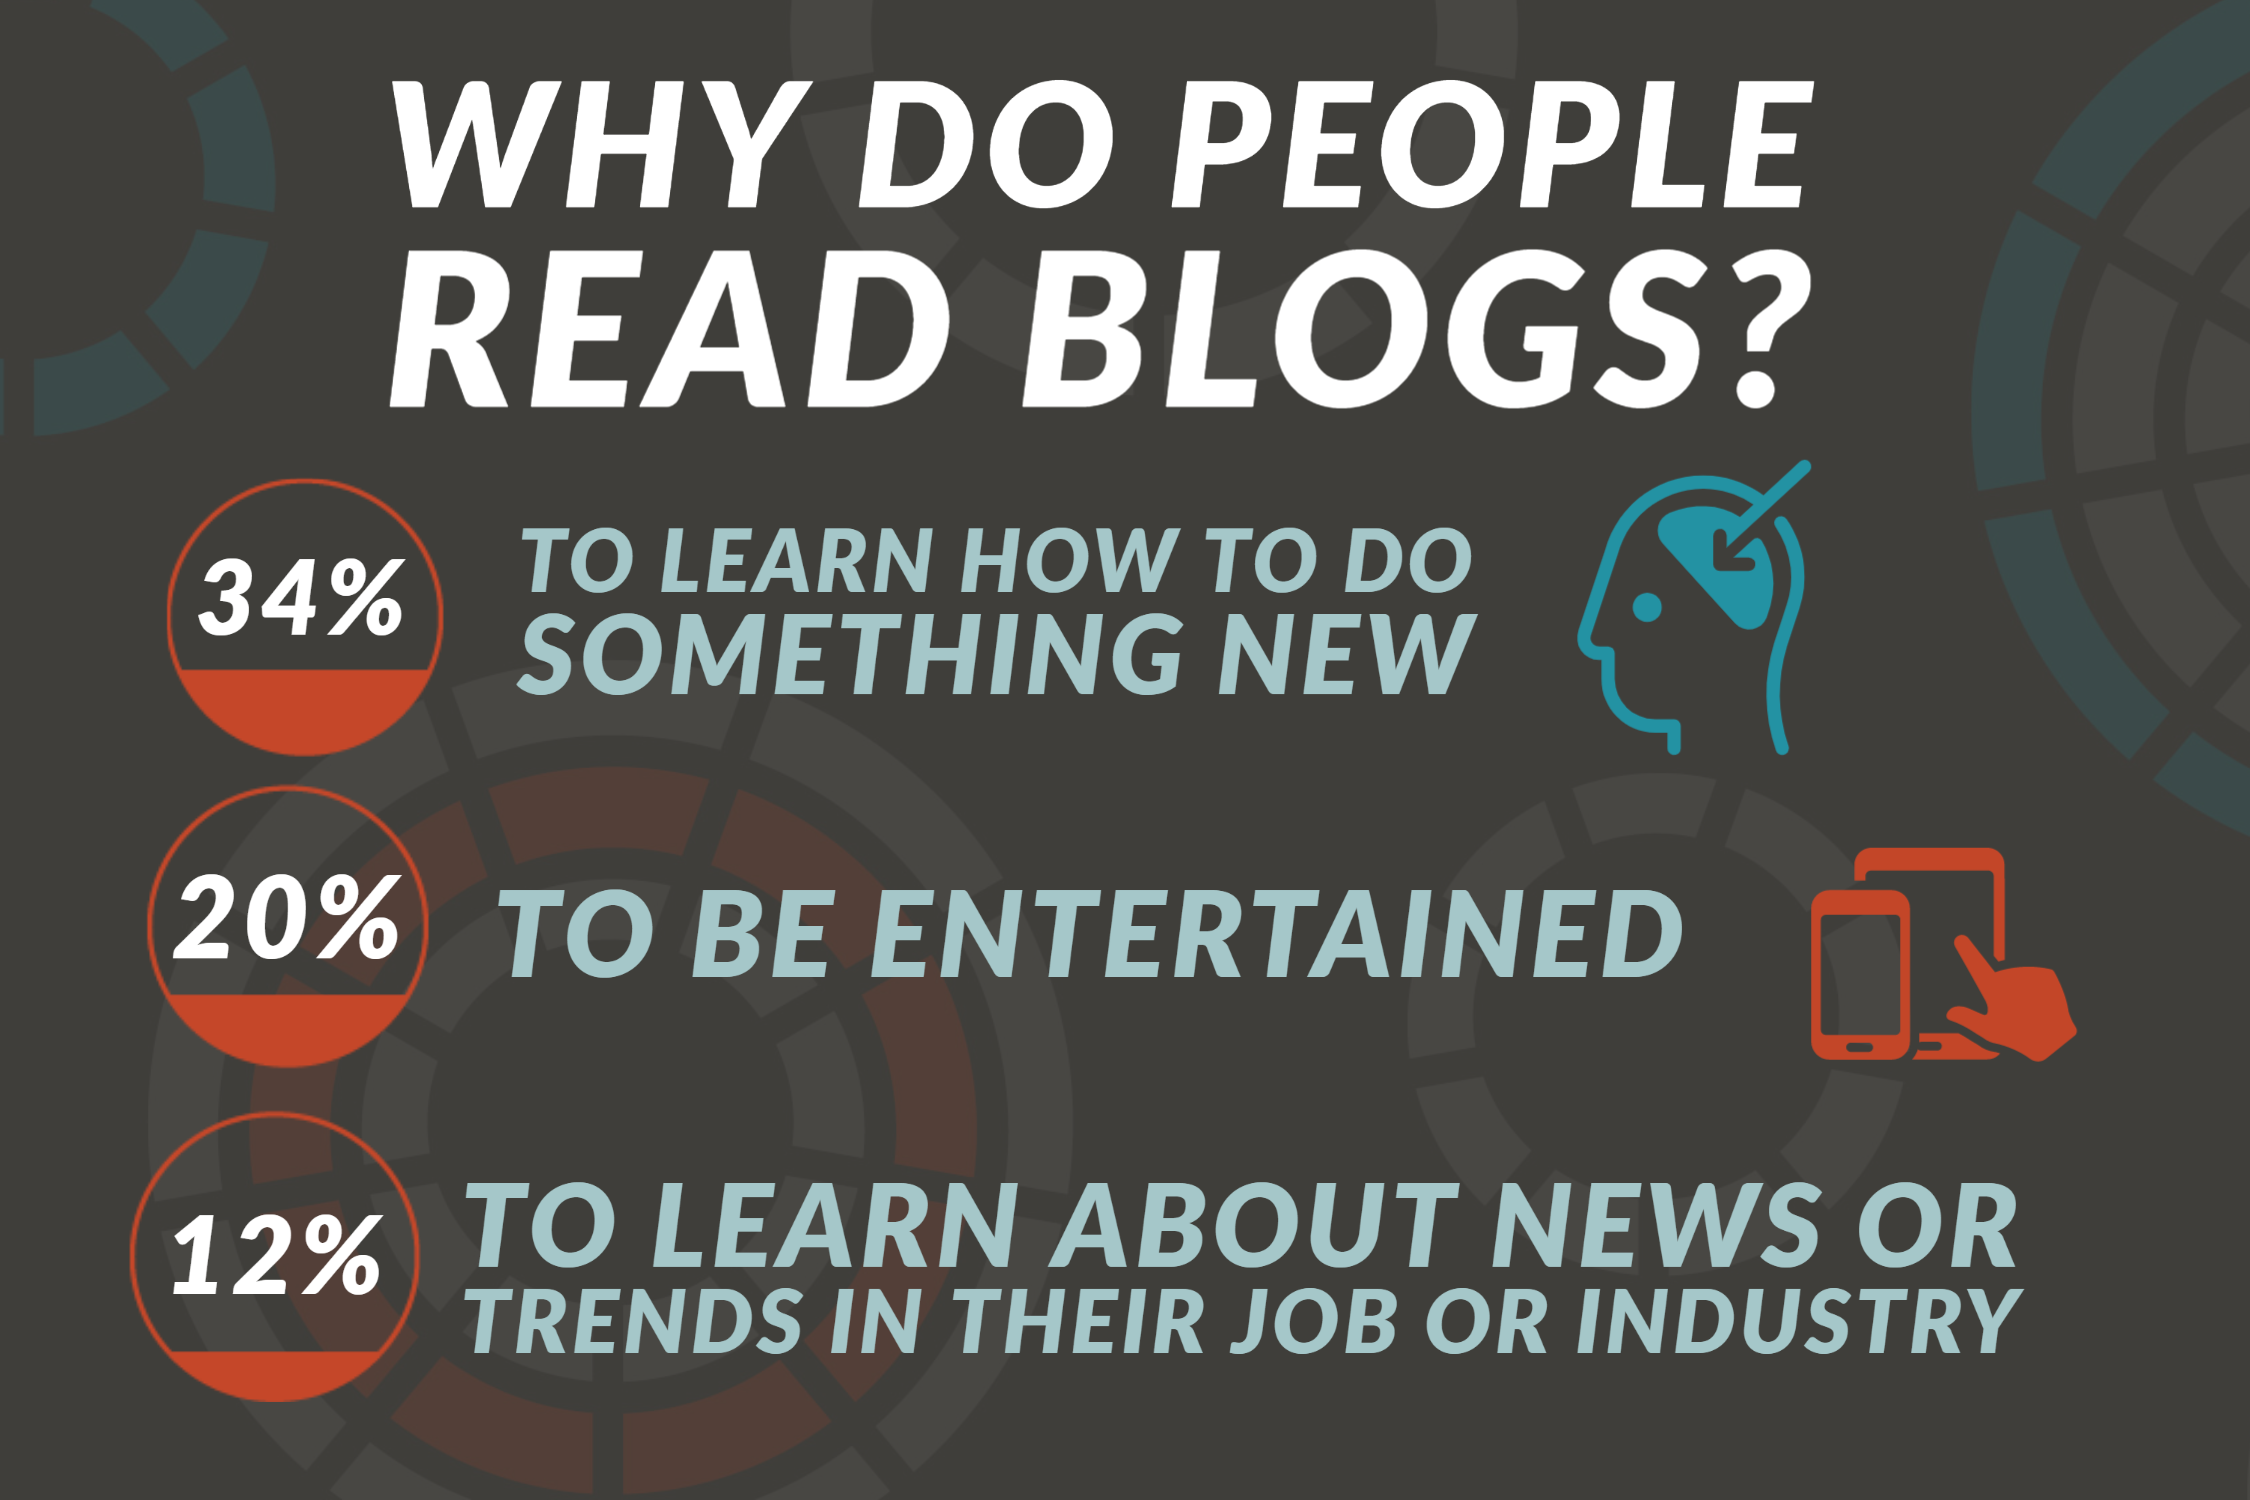 Why do people read blogs?